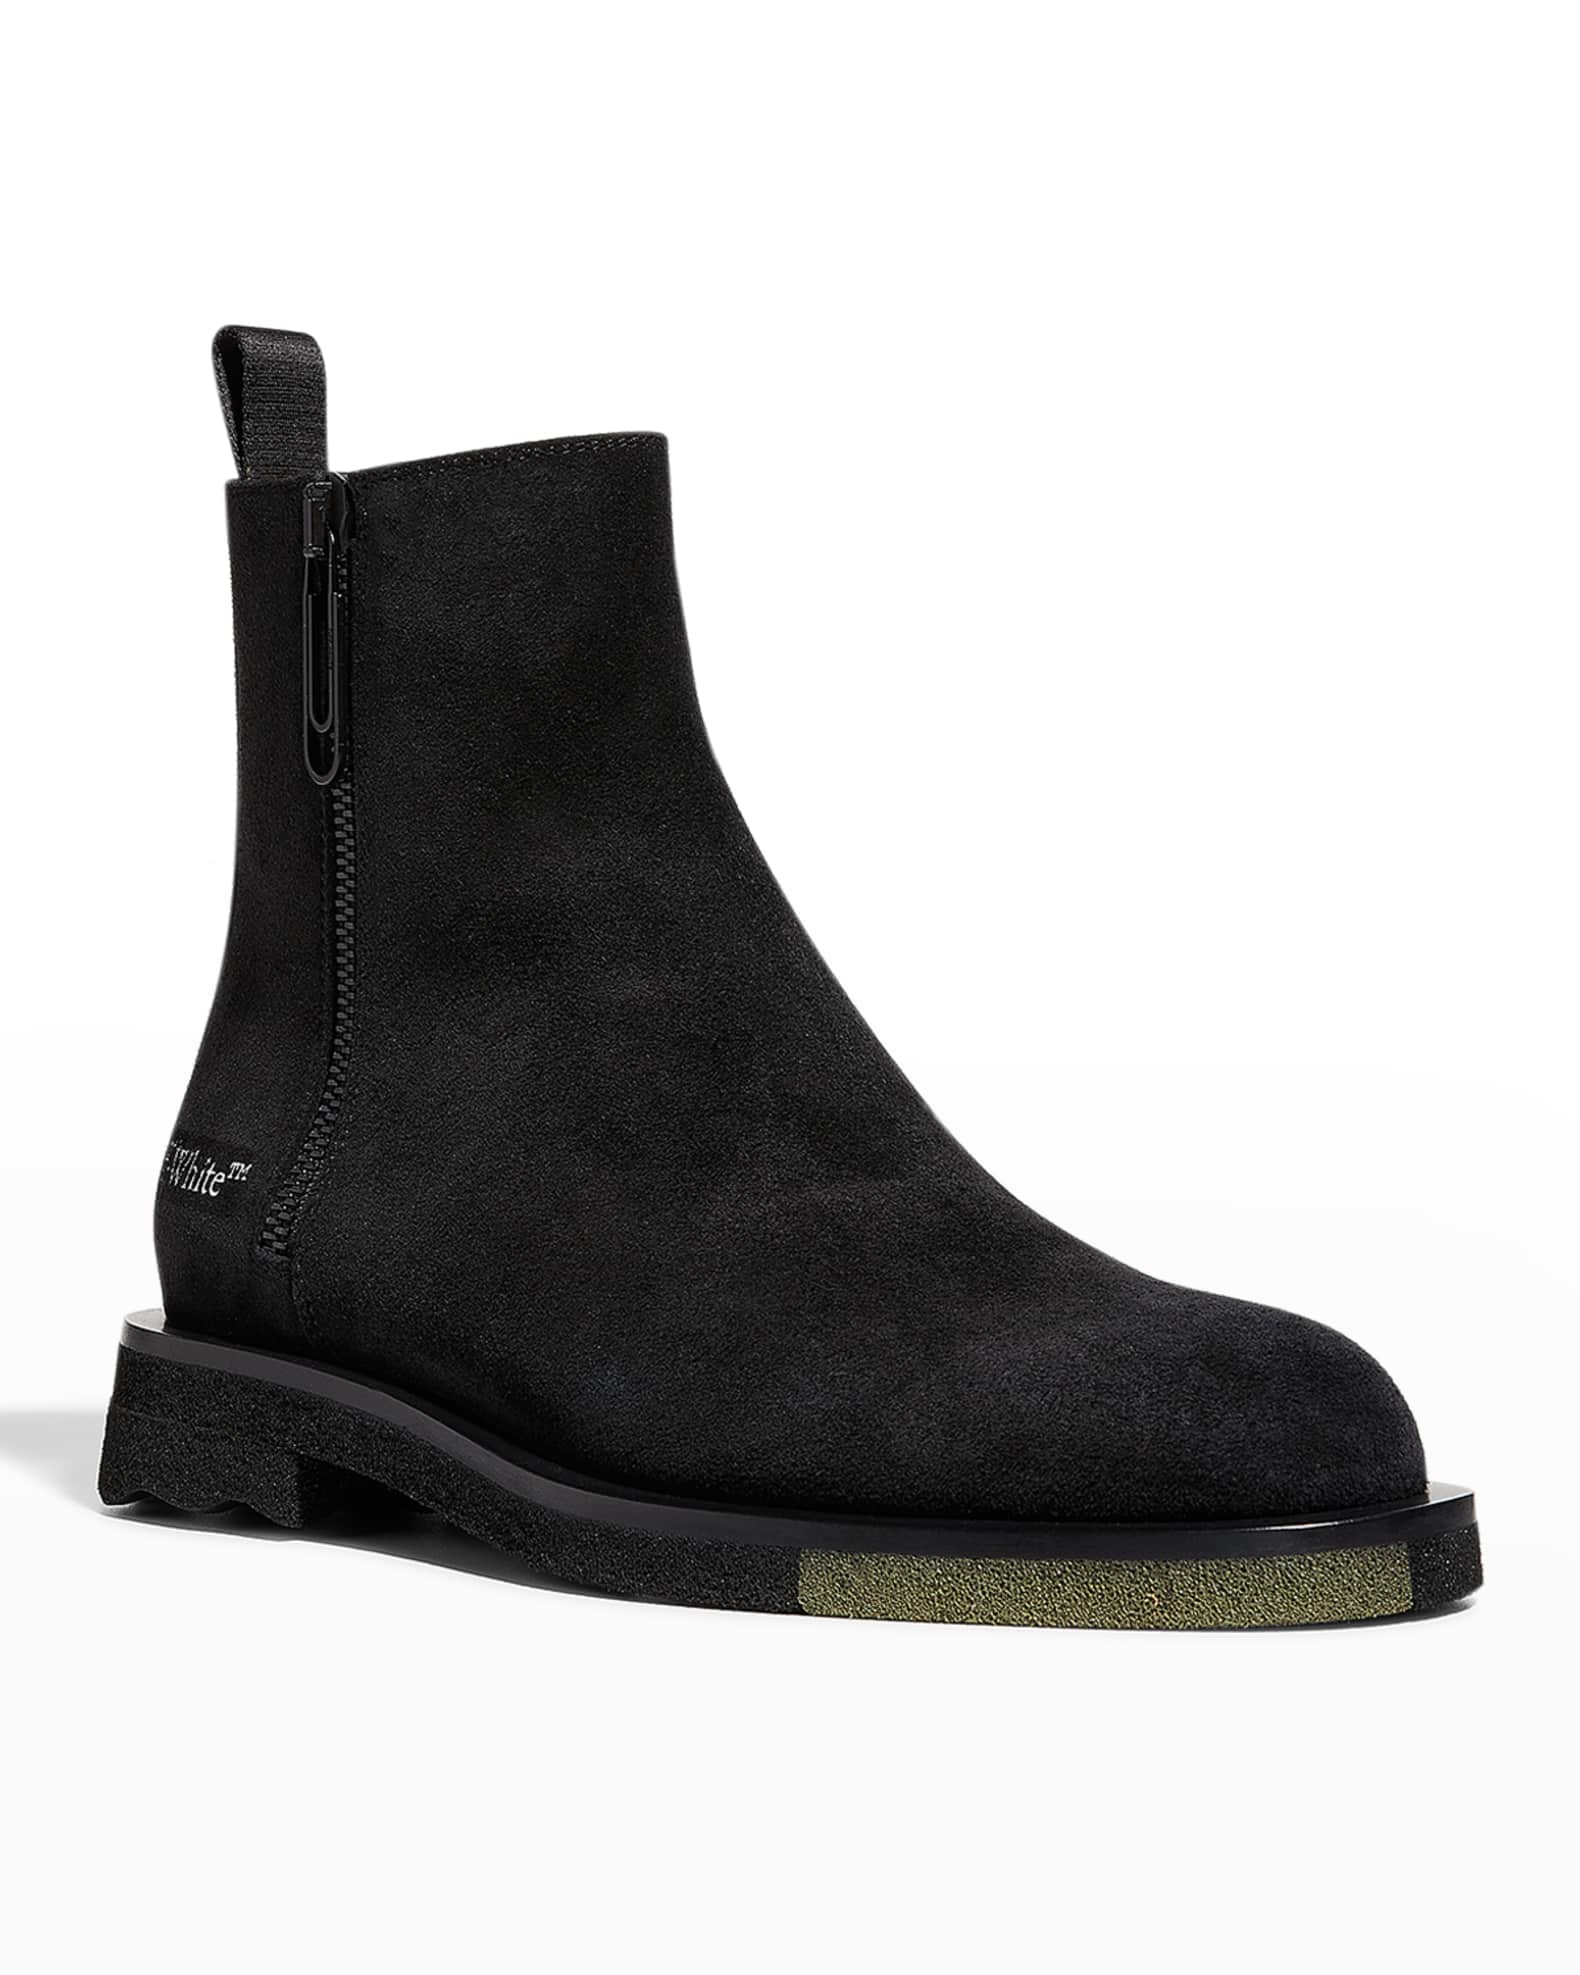 Mens Shoes Boots Casual boots Off-White c/o Virgil Abloh Leather Sponge Sole Chelsea Boots in Black for Men 